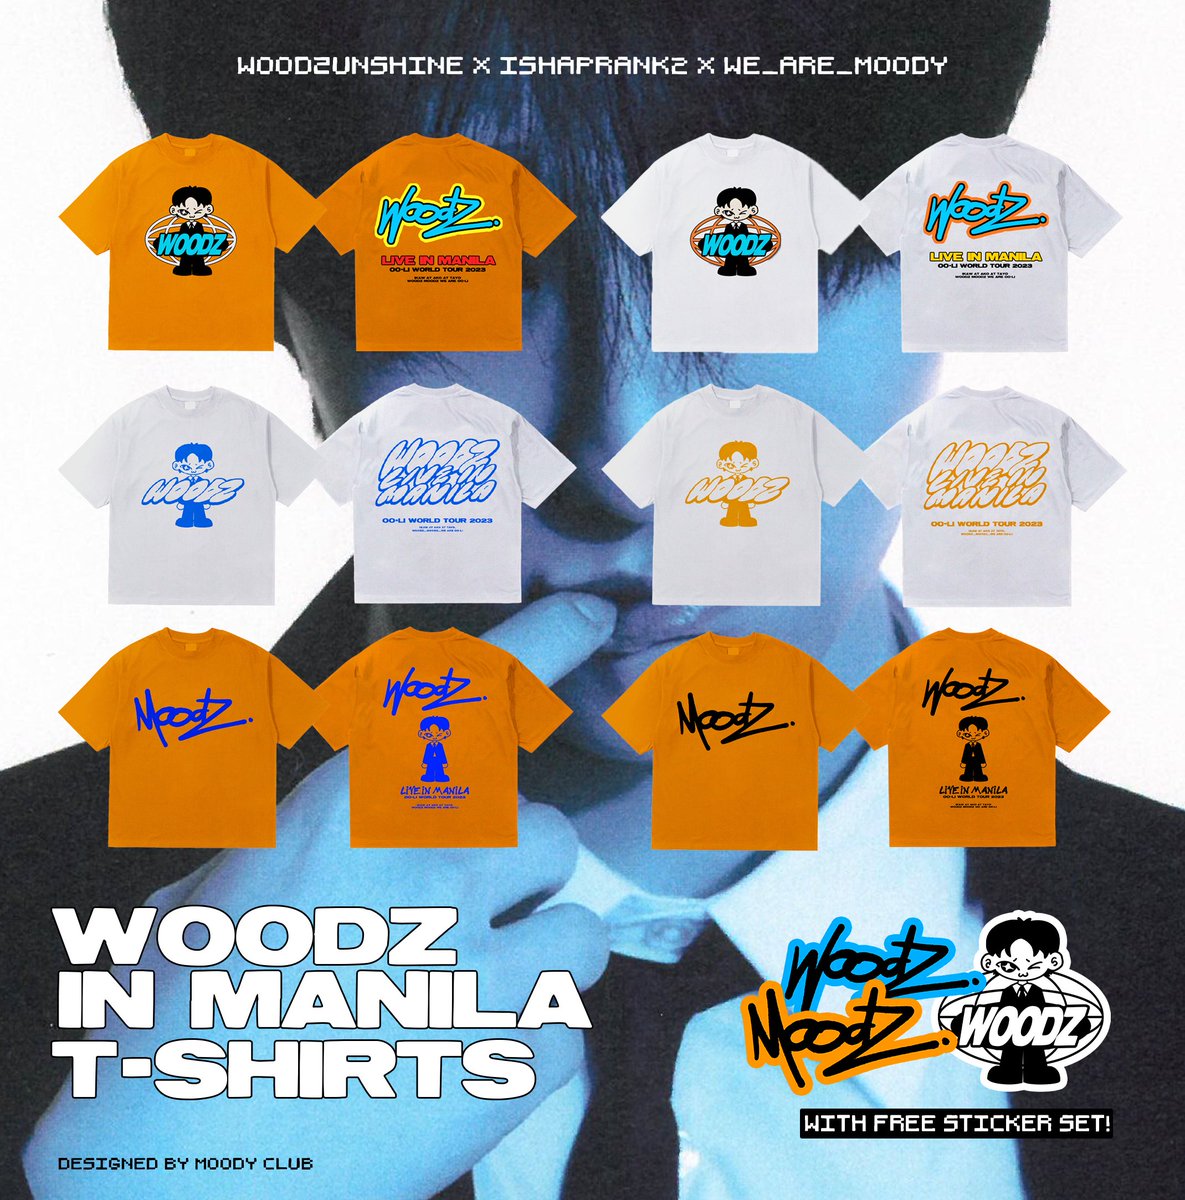 #WDZinMNL_customSHIRT a collab project by MOODZ for MOODZ 🧡💙

50 PHP from the sales of each shirt will proceed to #WOODZinMNL Fan project Fundraising conducted by @WOODZPilipinas

Pre-order & Payment 'til: 5/17

Price: 330 PHP (XS-2XL)
Pre-order form: 
🔗bit.ly/WDZinMNL_Custo…